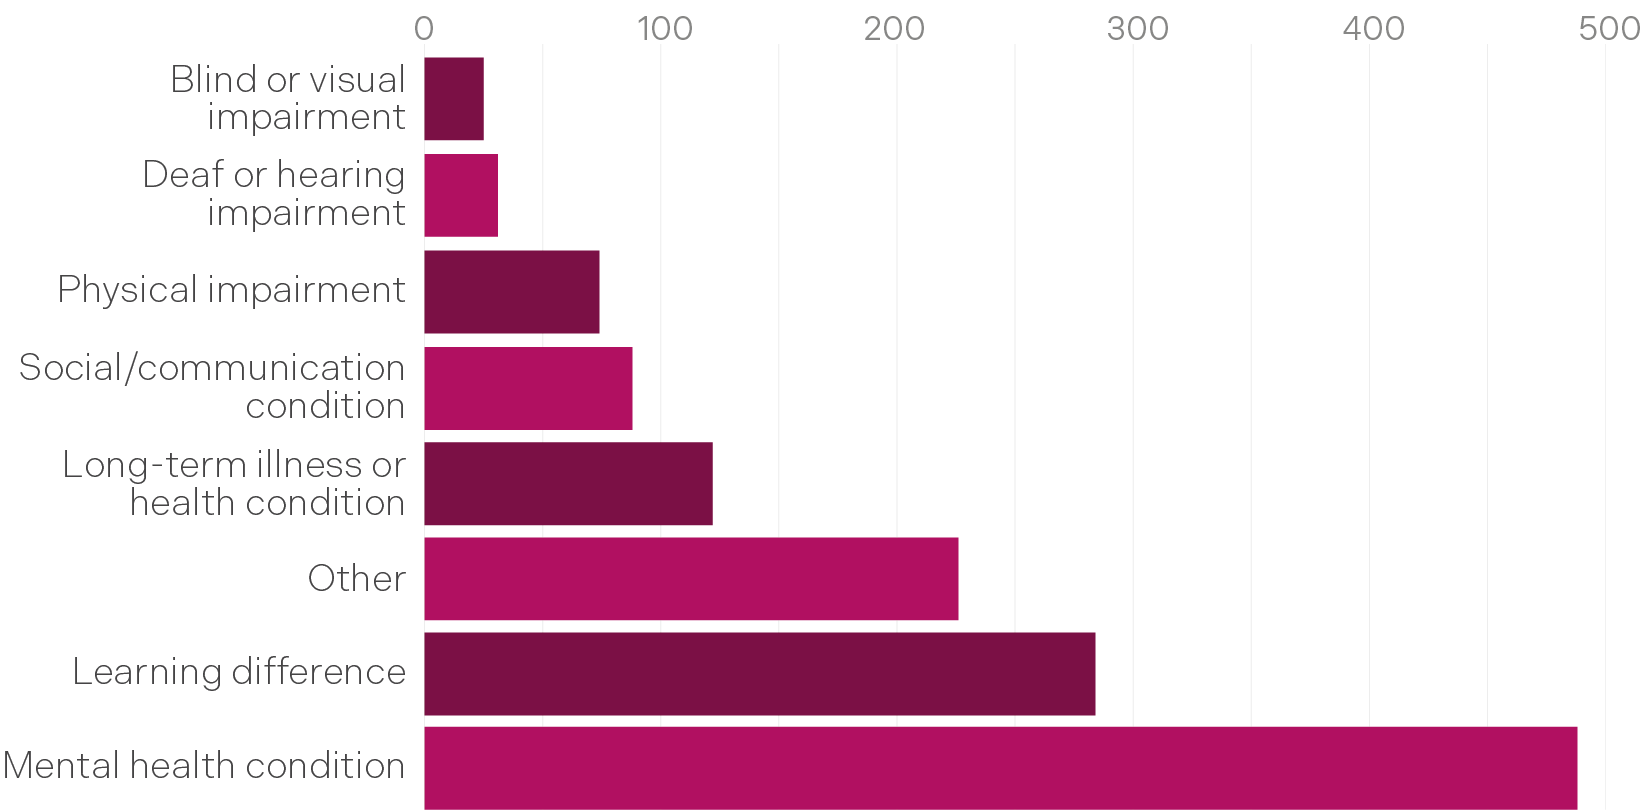 Bar chart showing the breakdown of reported disability types of complaints received.